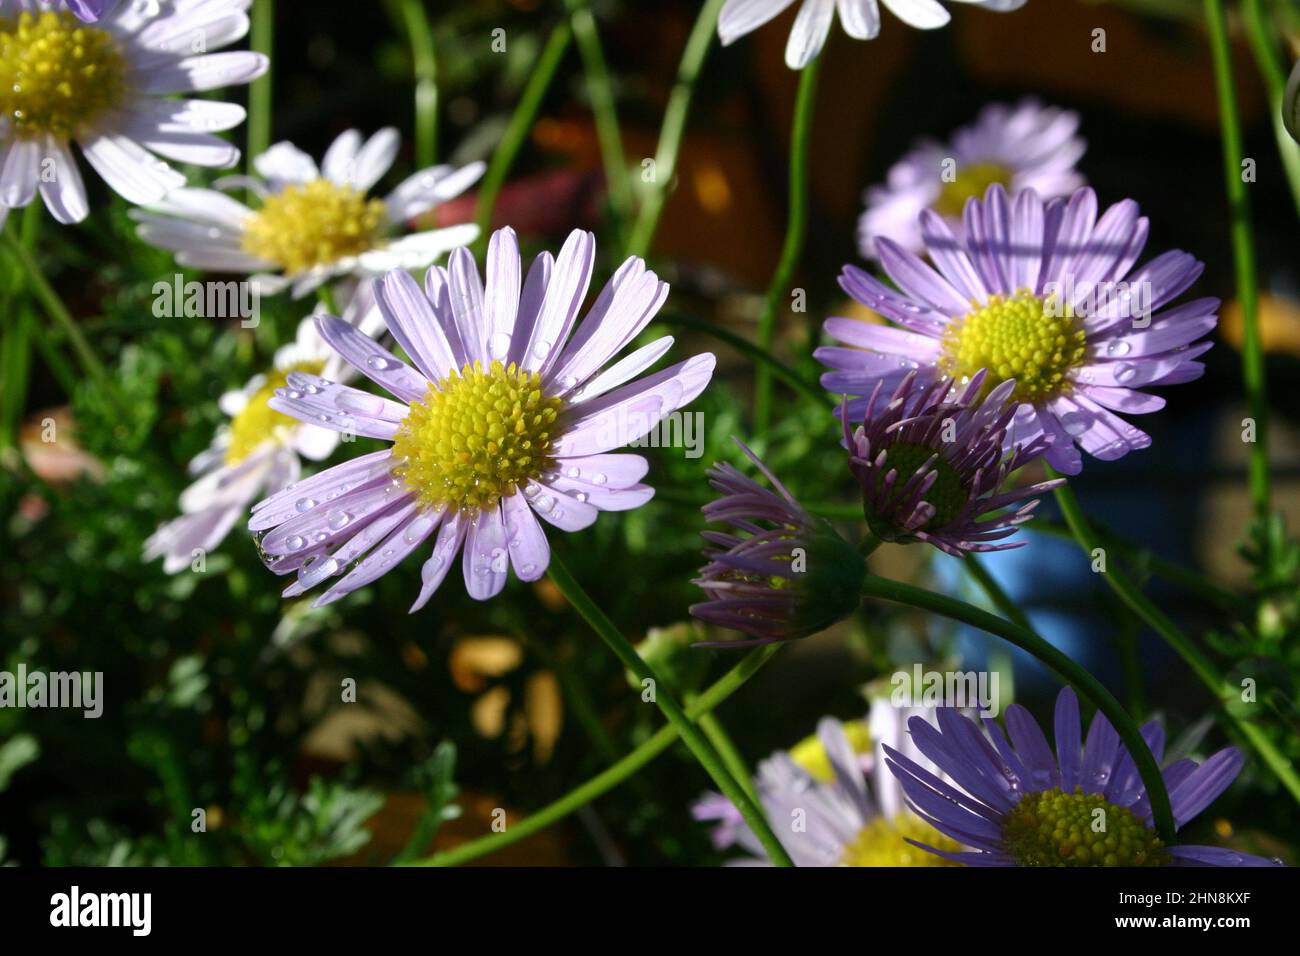 FLOWER HEAD OF BRACHYSCOME SEGMENTOSA (hybrid) COMMONLY KNOWN AS LORD HOWE ISLAND DAISY OR MOUNTAIN DAISY. Stock Photo